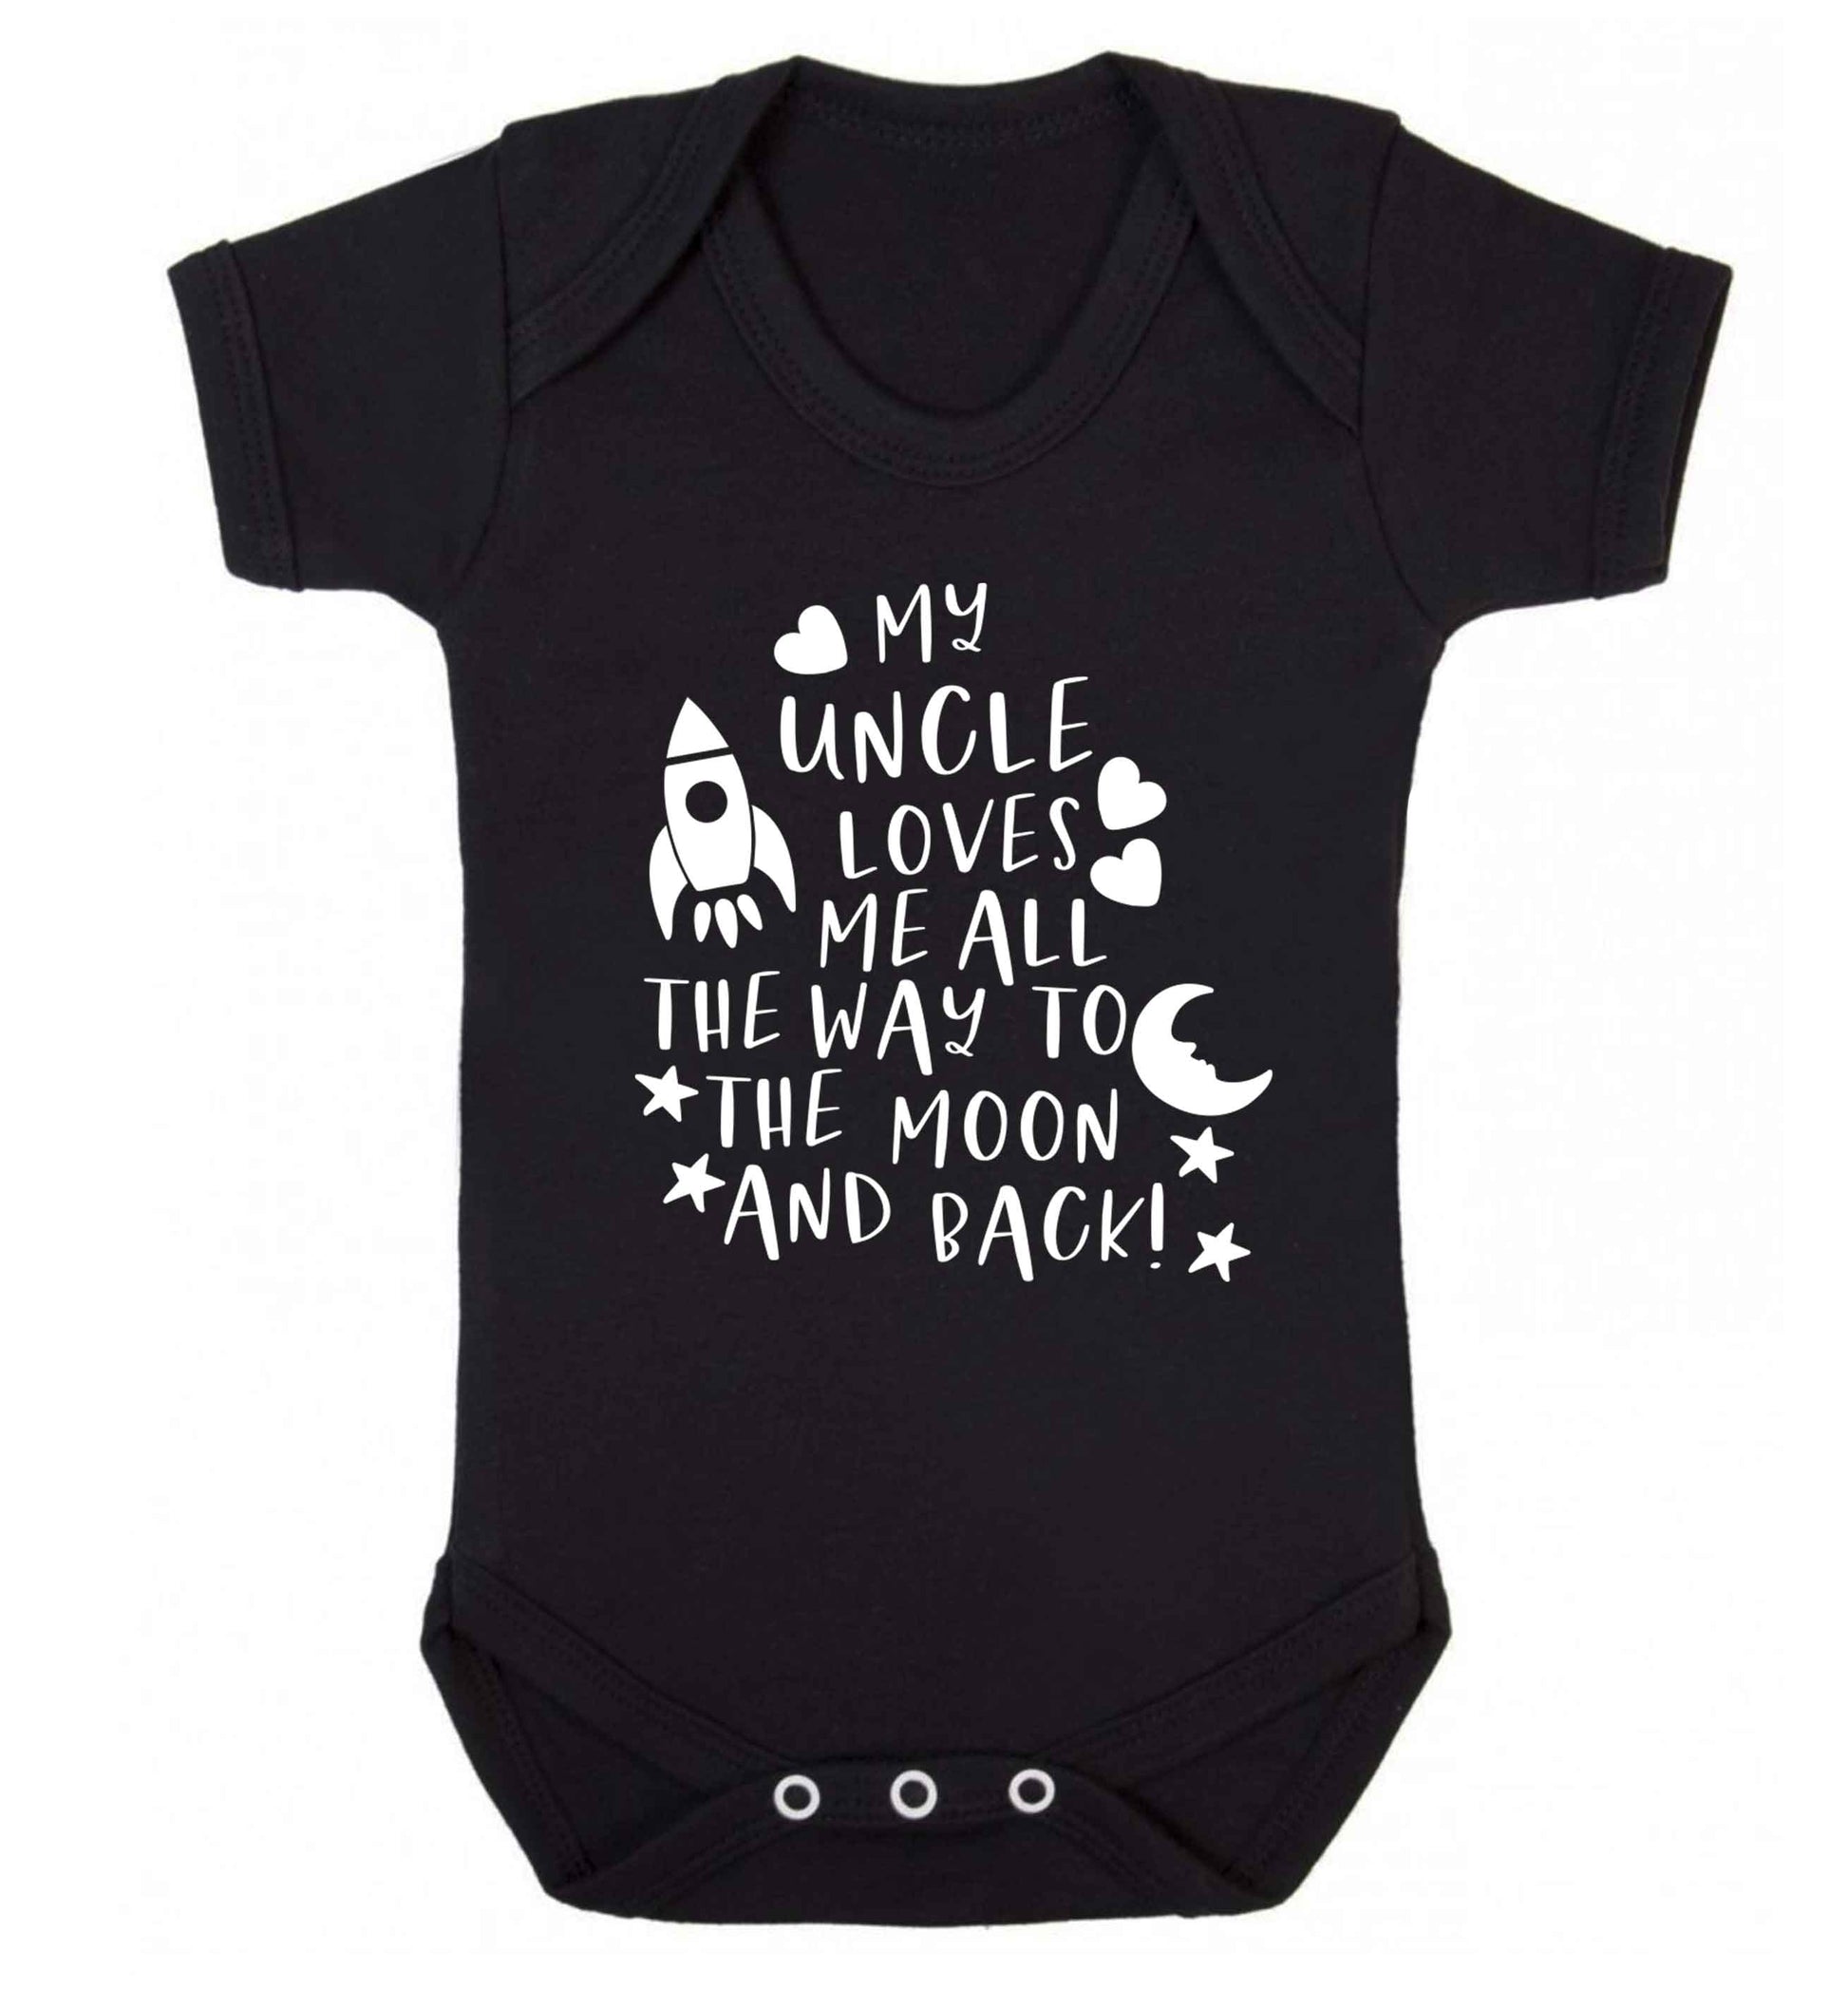 My uncle loves me all the way to the moon and back Baby Vest black 18-24 months